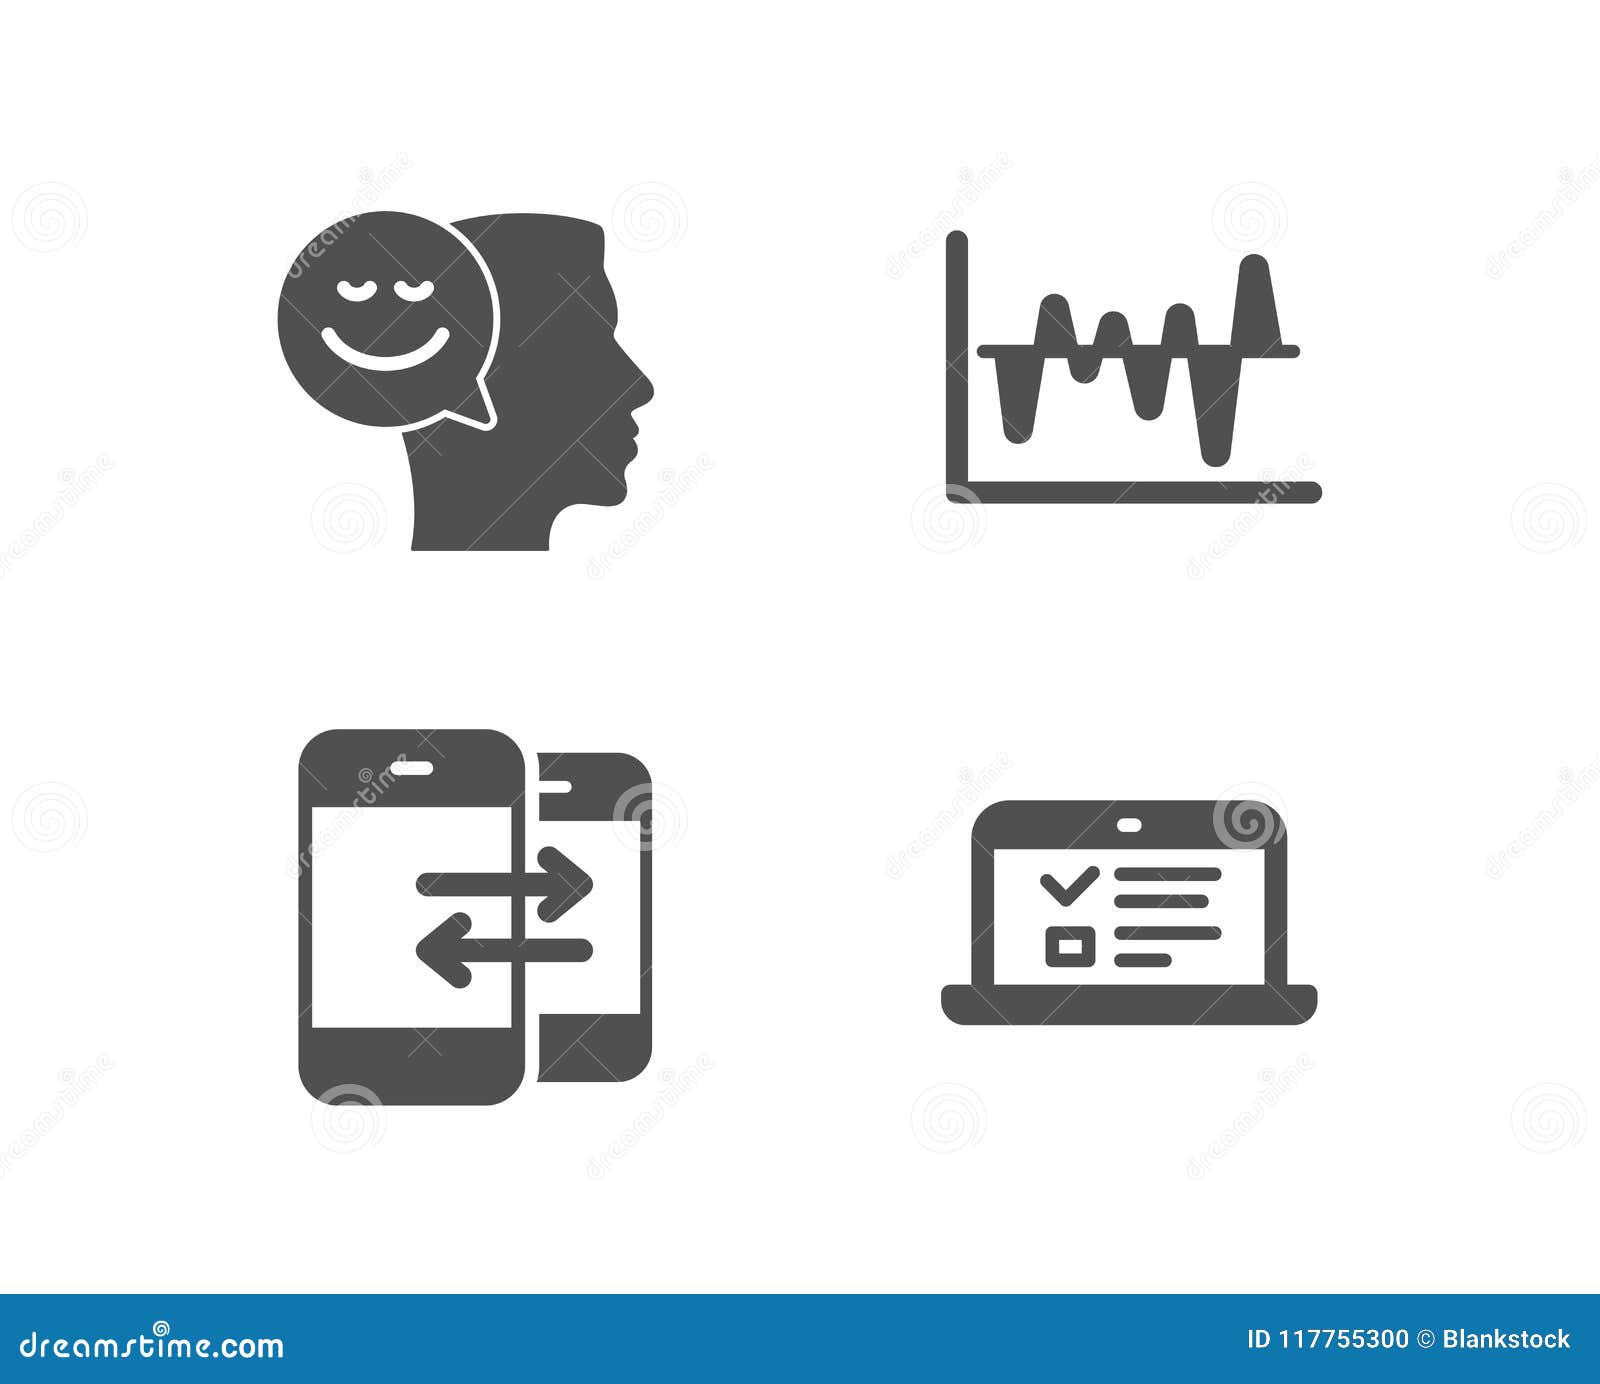 phone communication, stock analysis and good mood icons. web lectures sign.